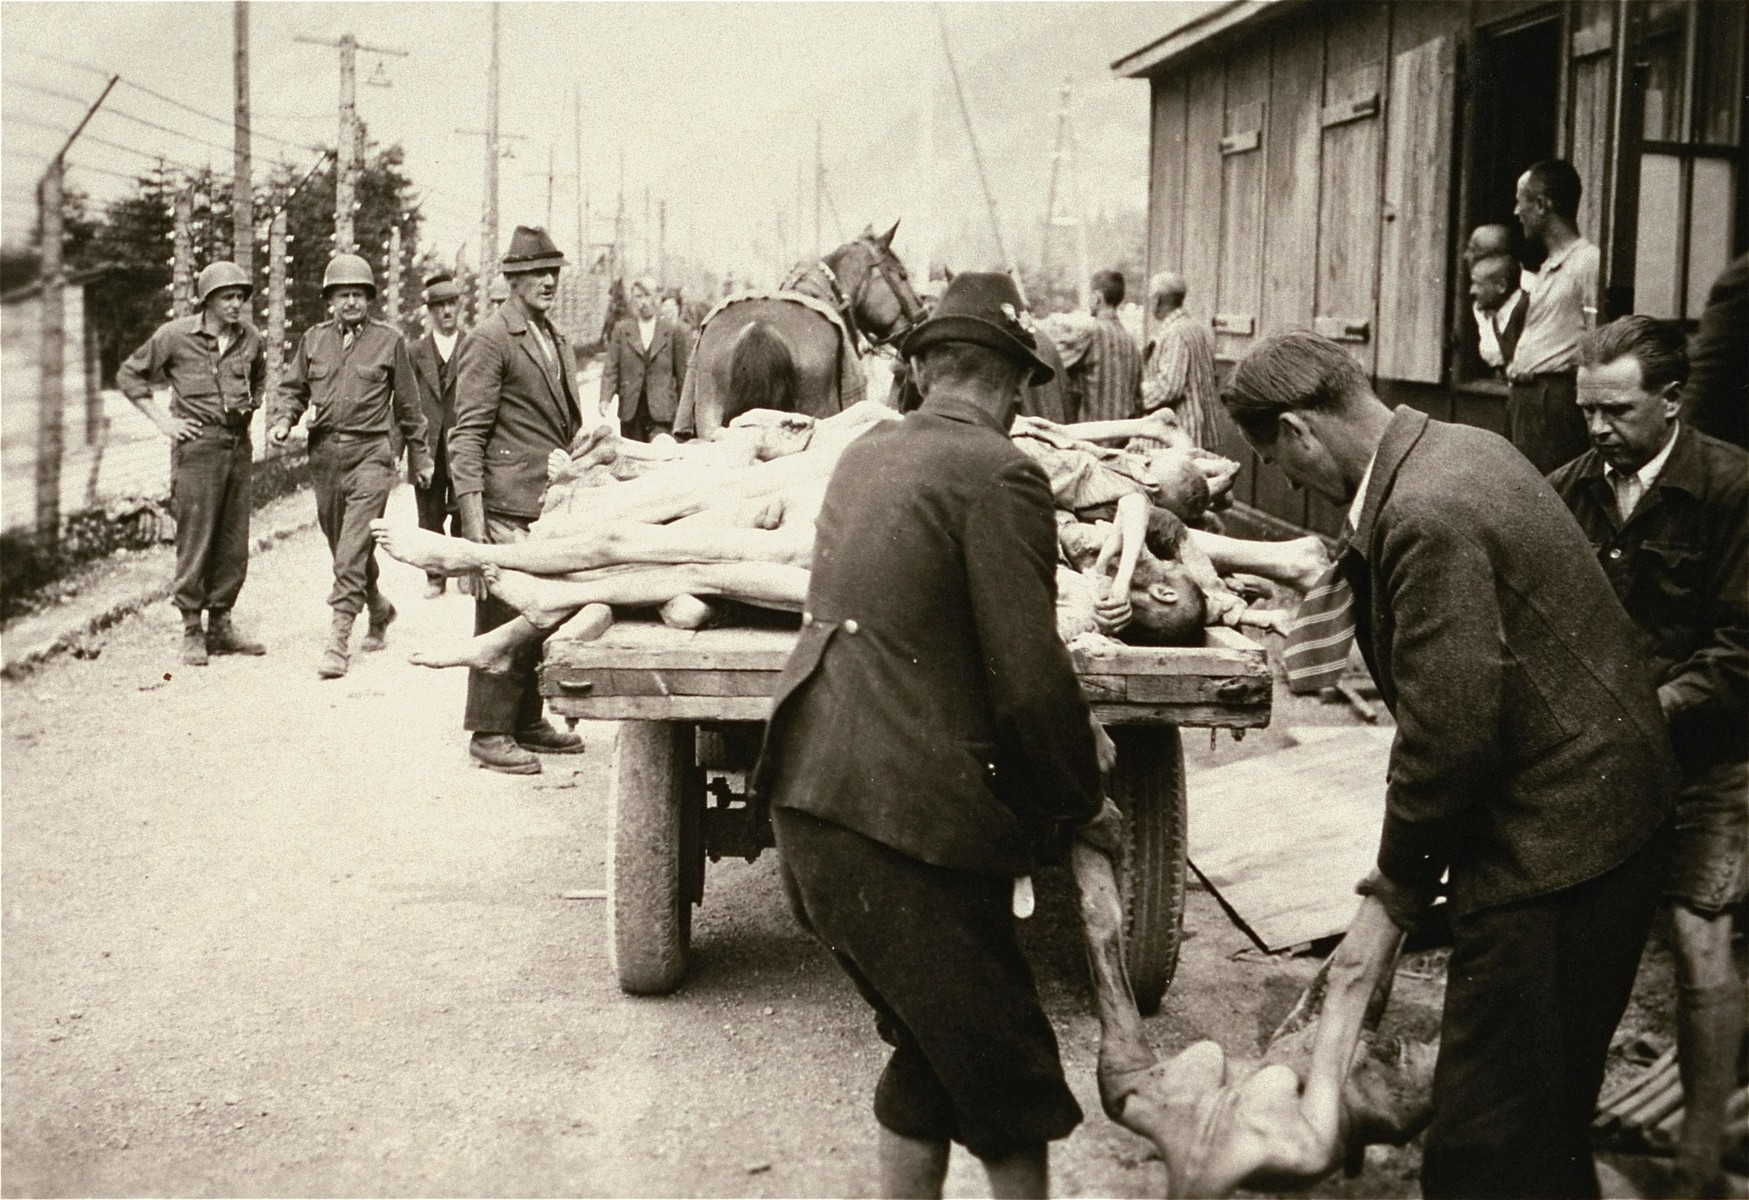 Austrian civilians participate in clearing the dead in the Ebensee concentration camp.  The barracks in the background was found filled with corpses.